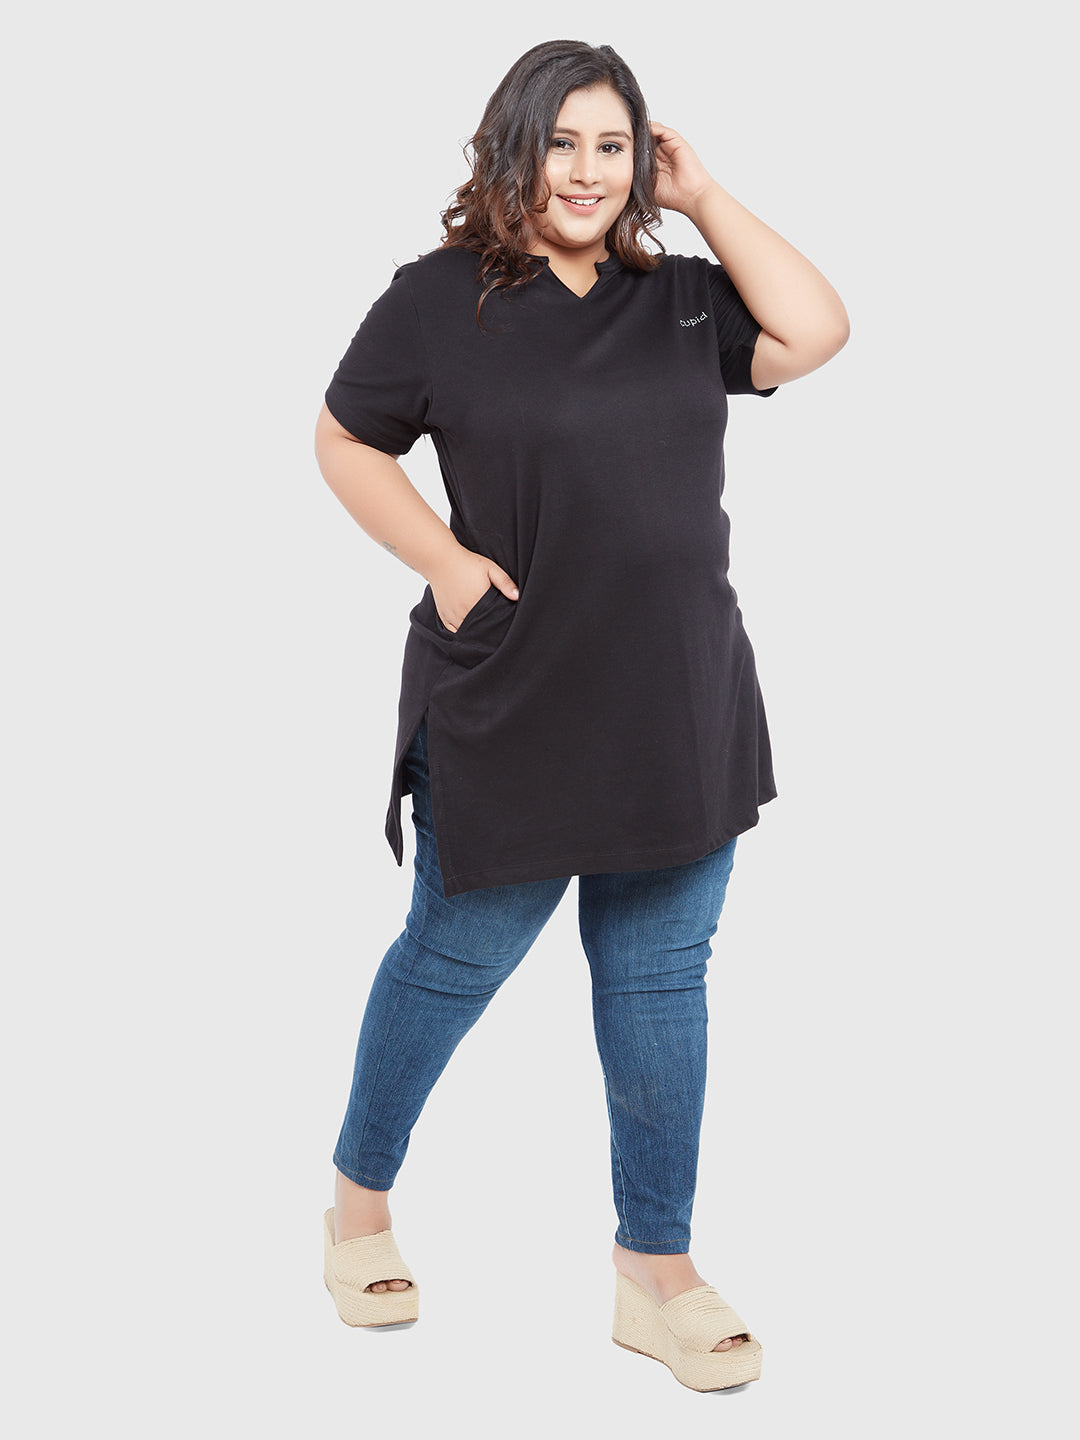 Comfortable Half Sleeves Long Top For Women In Plus Size - Black At Best Prices